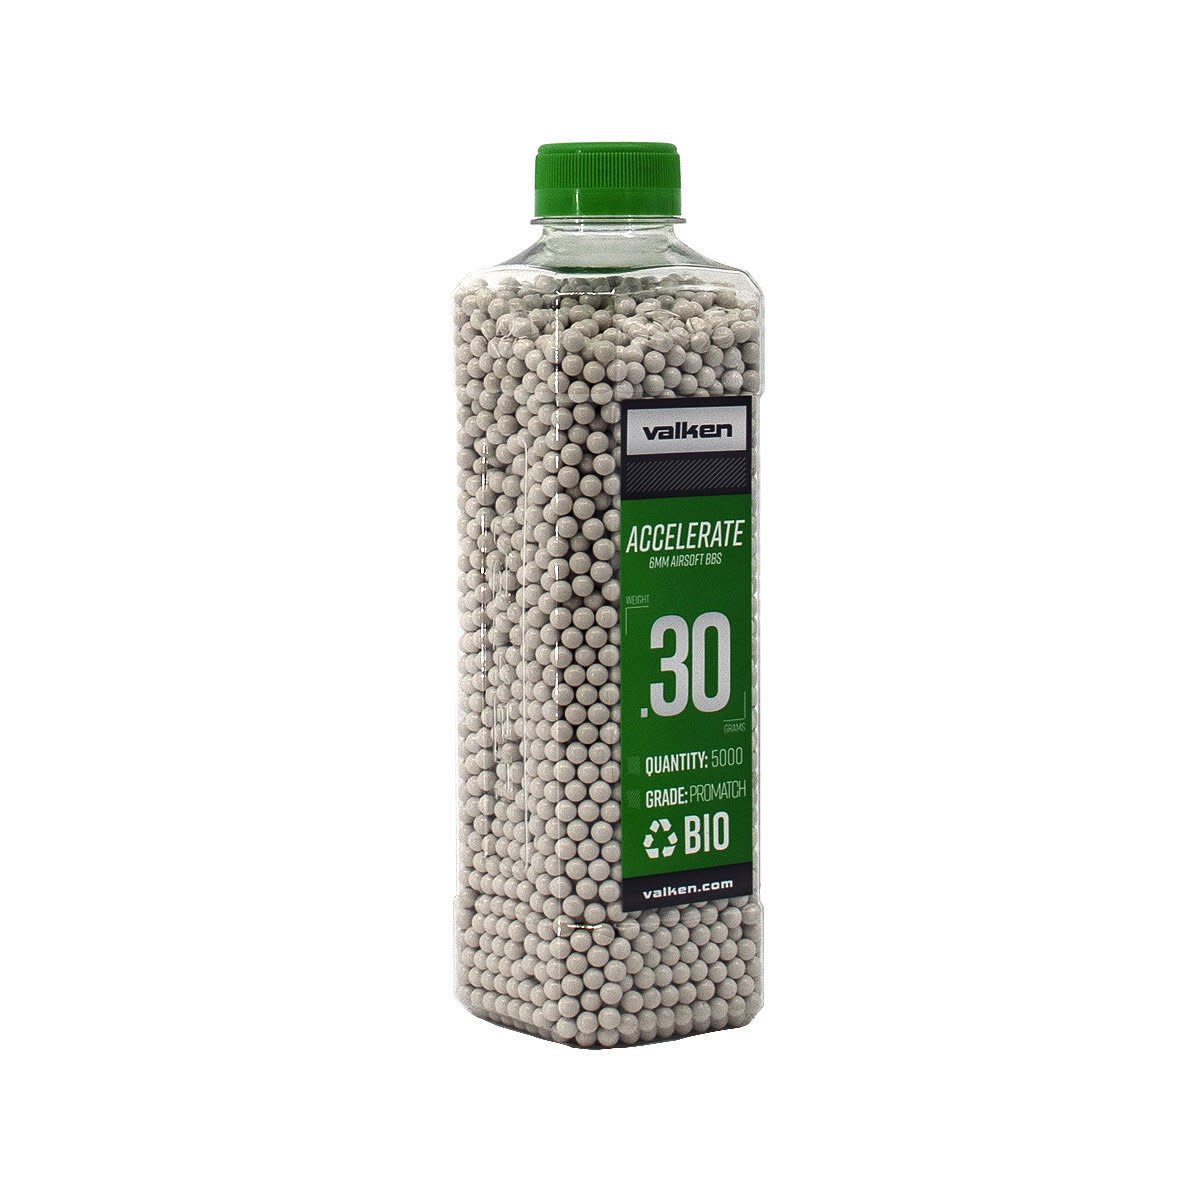 Valken ACCELERATE Tactical 0.20 White Airsoft BBs BB's 5000 Count Bottle .20g 